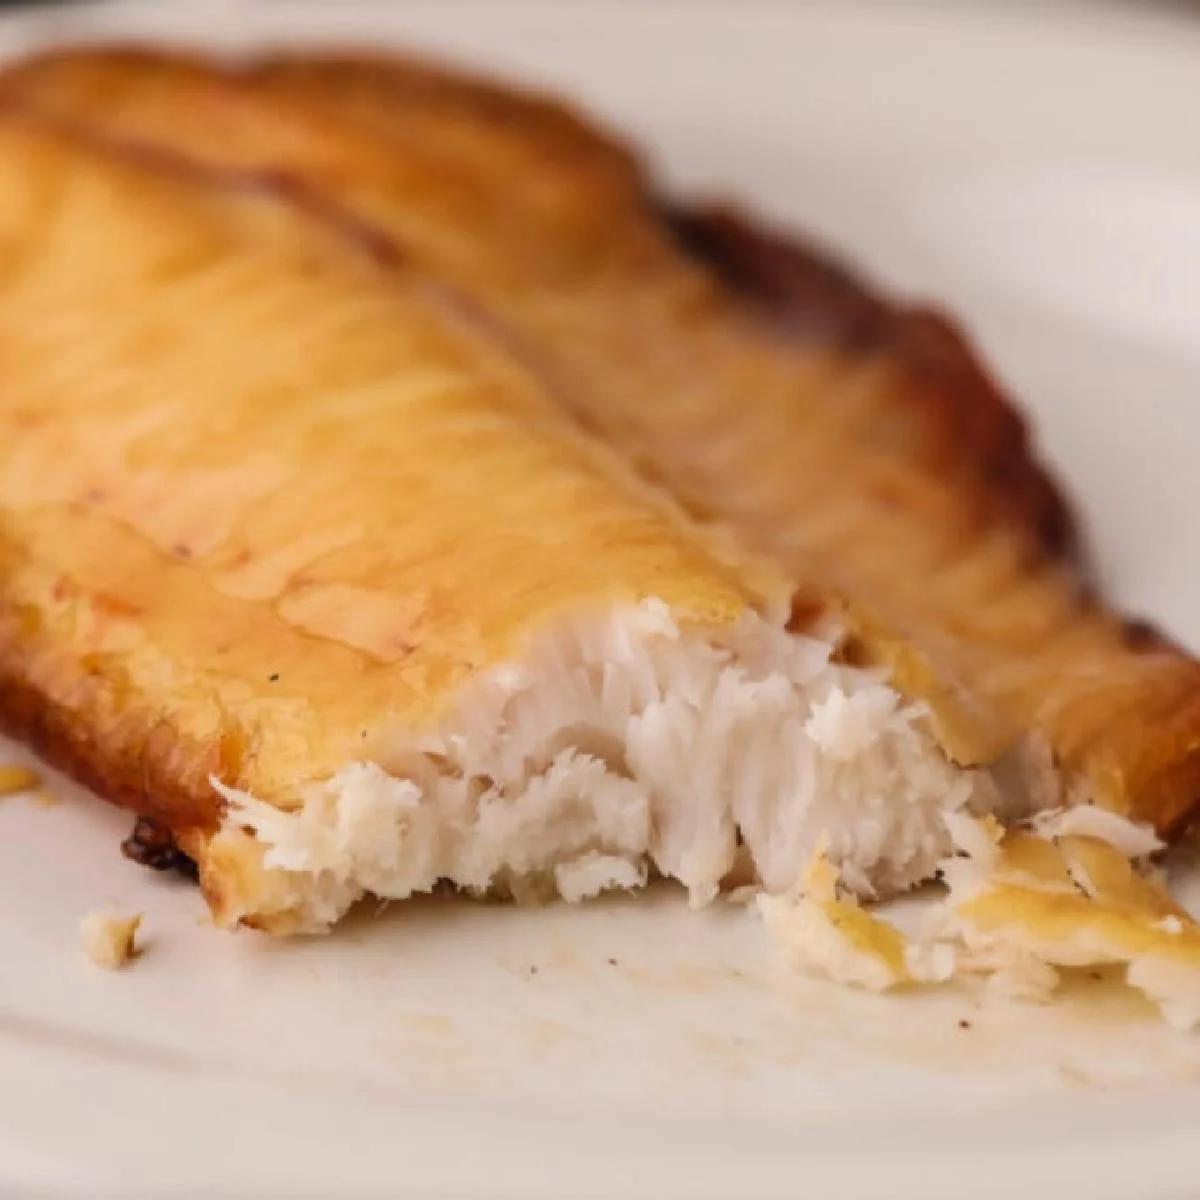 how to cook smoked whitefish - Is smoked whitefish ready to eat